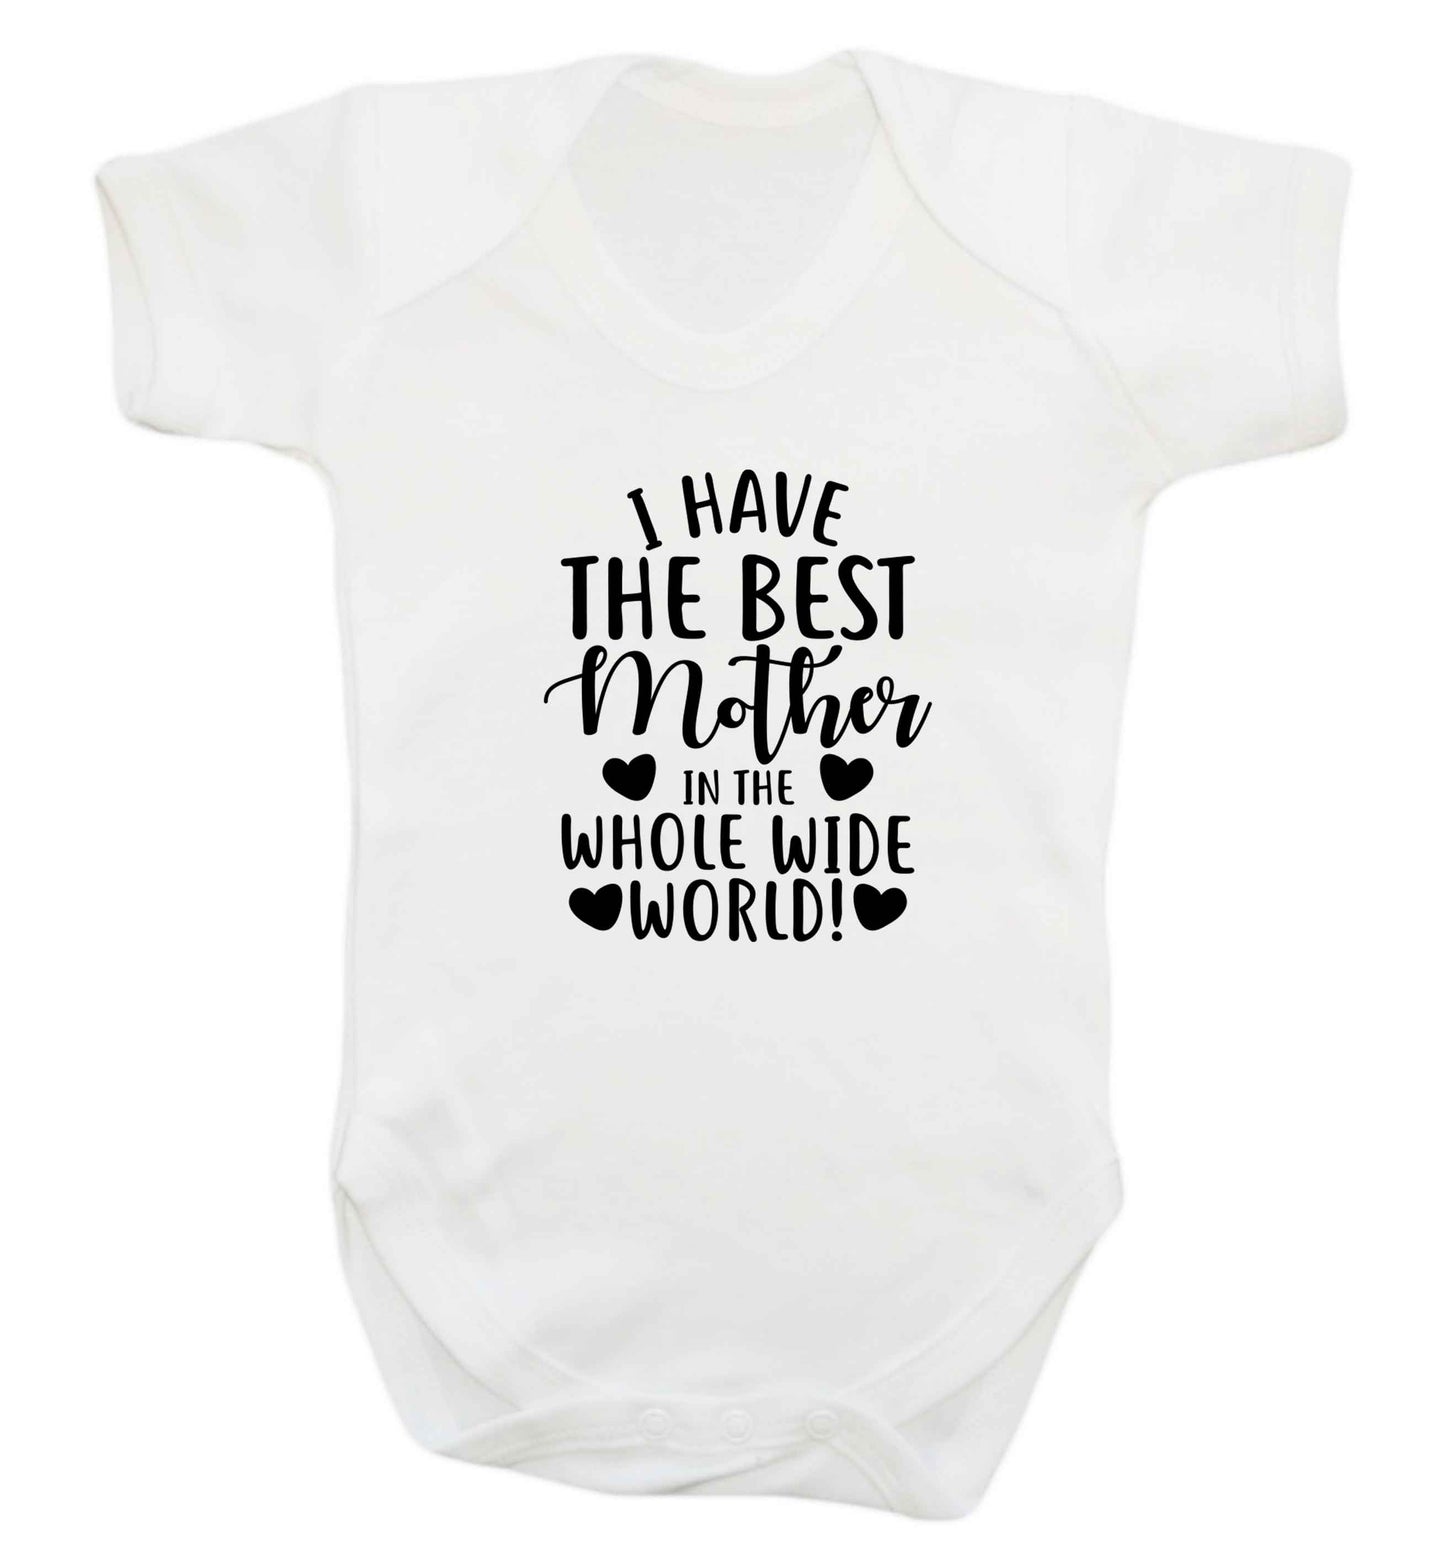 I have the best mother in the whole wide world baby vest white 18-24 months